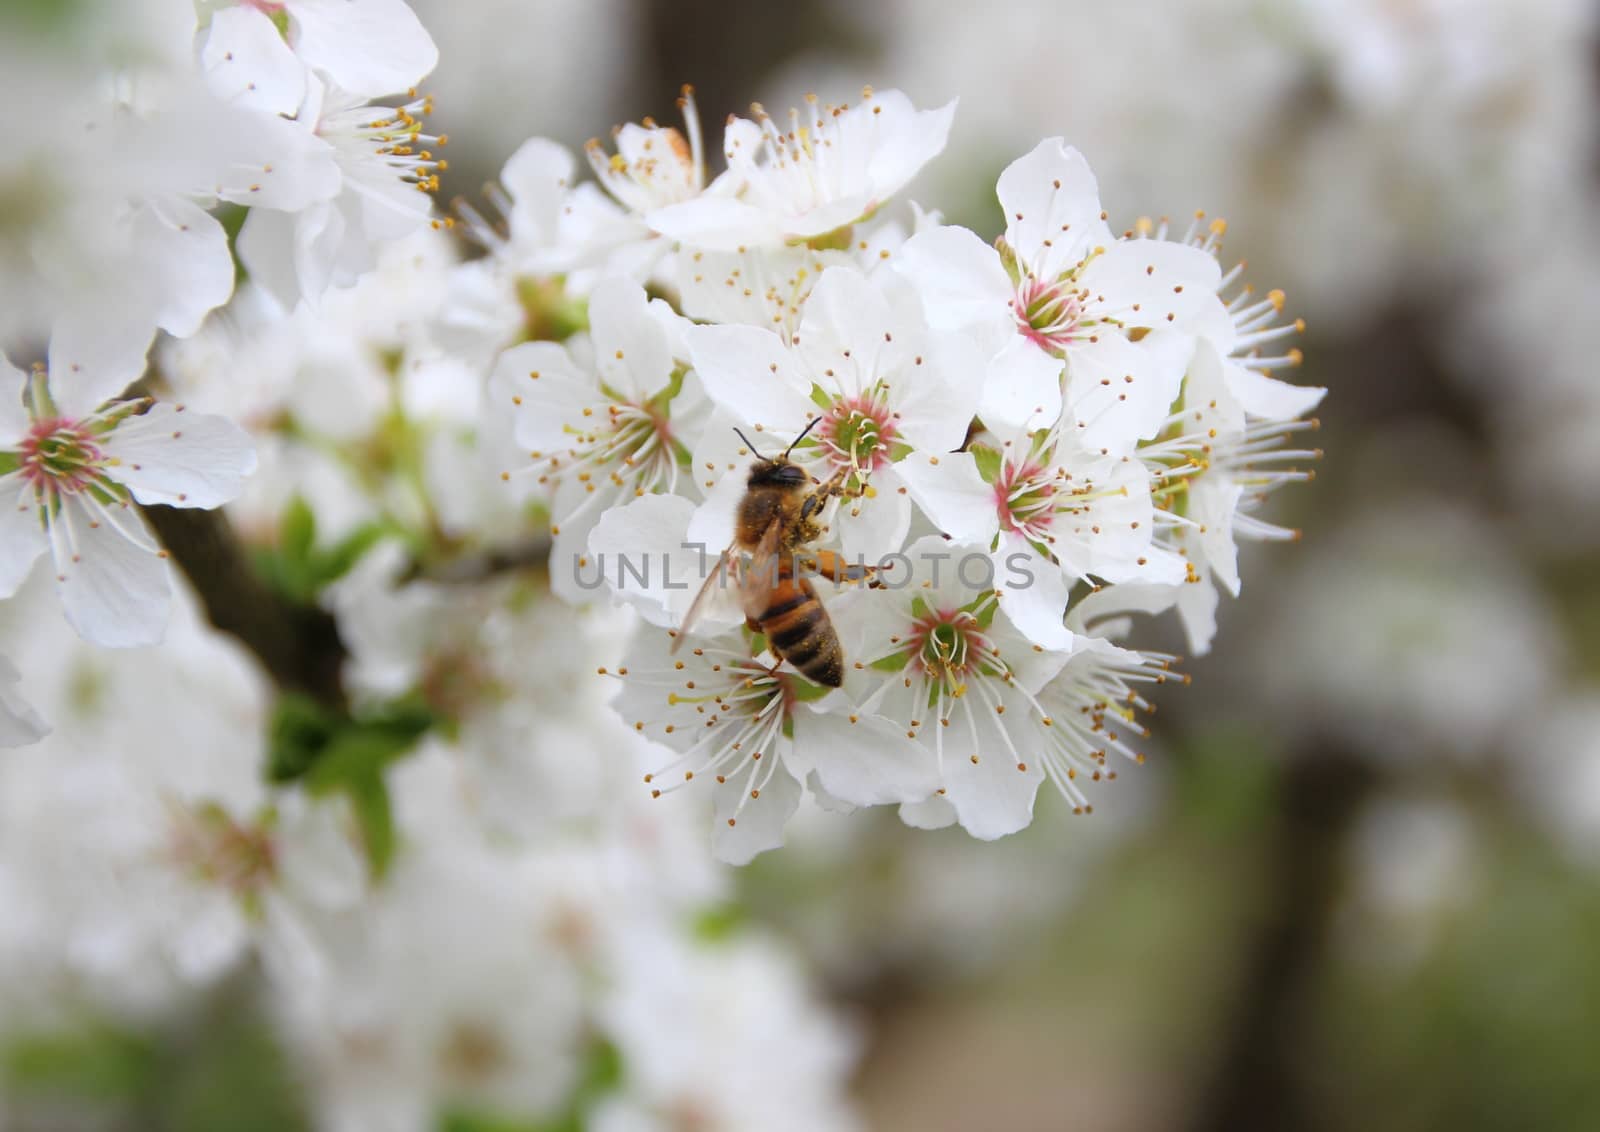 Isolated Honey Bee on White Flower Tree Covered with Nectar